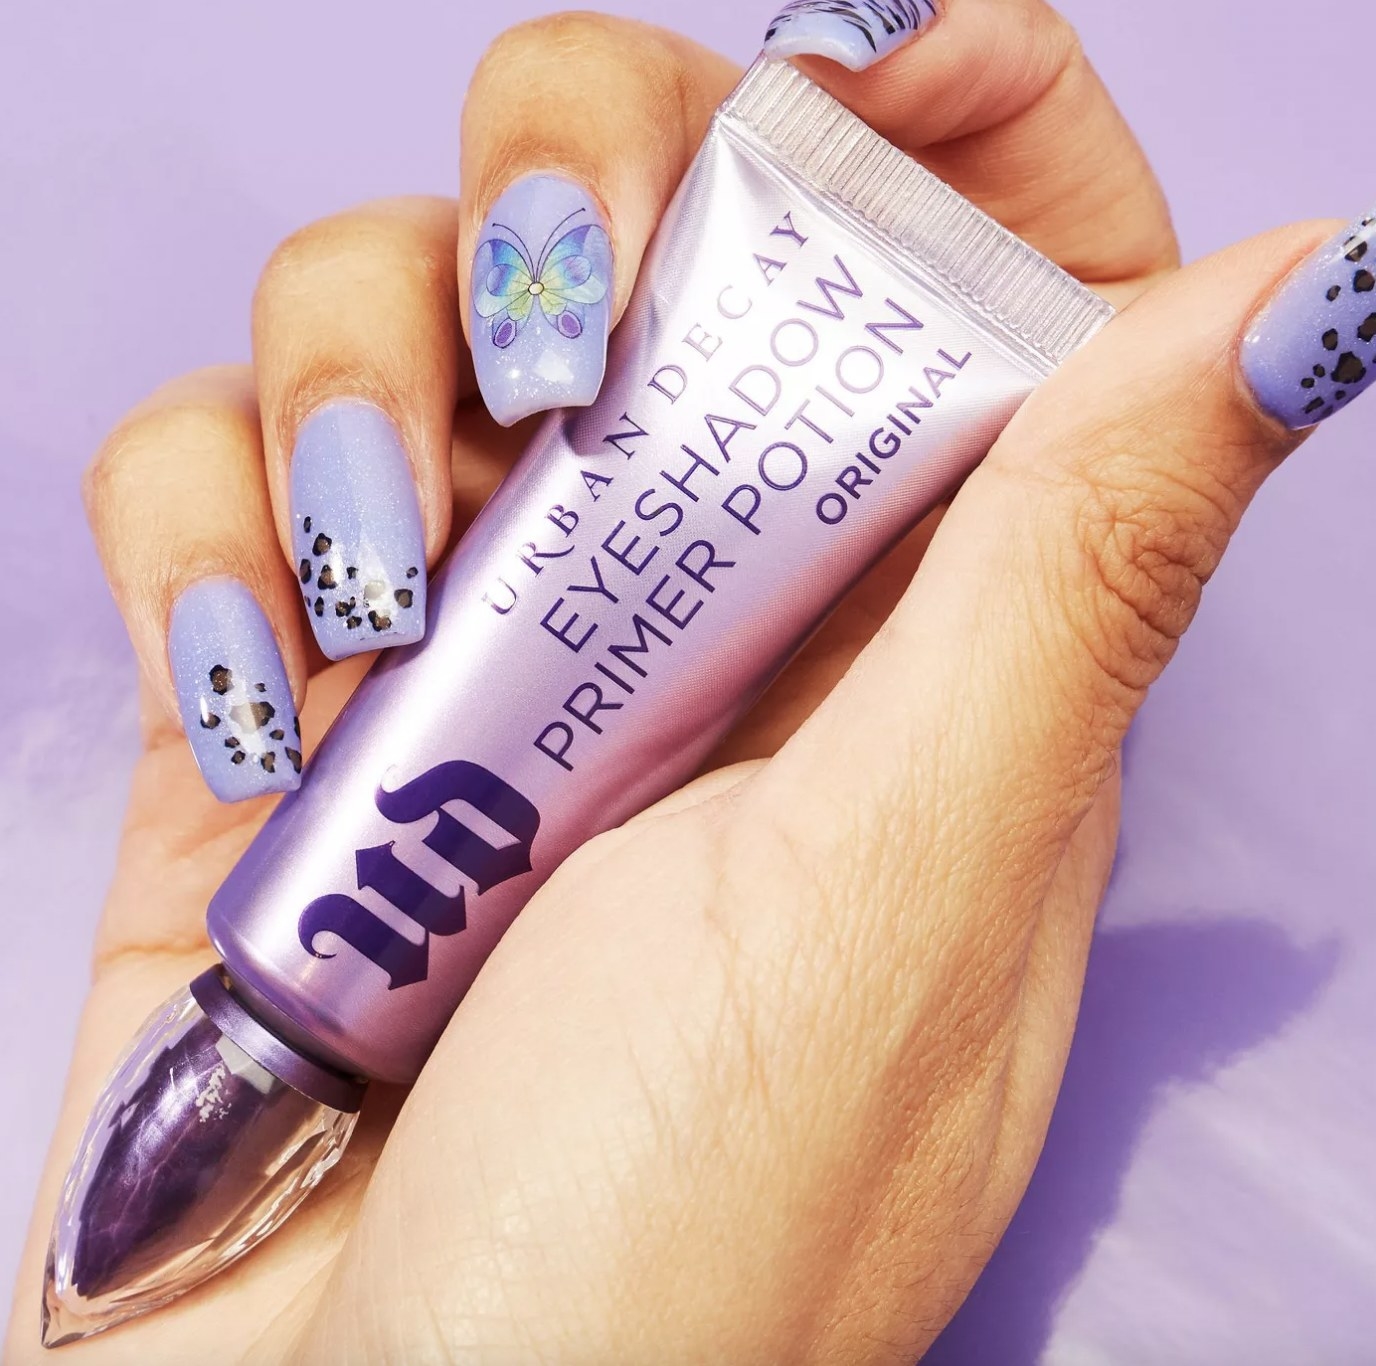 A person with a purple manicure holding a tube of eyeshadow primer